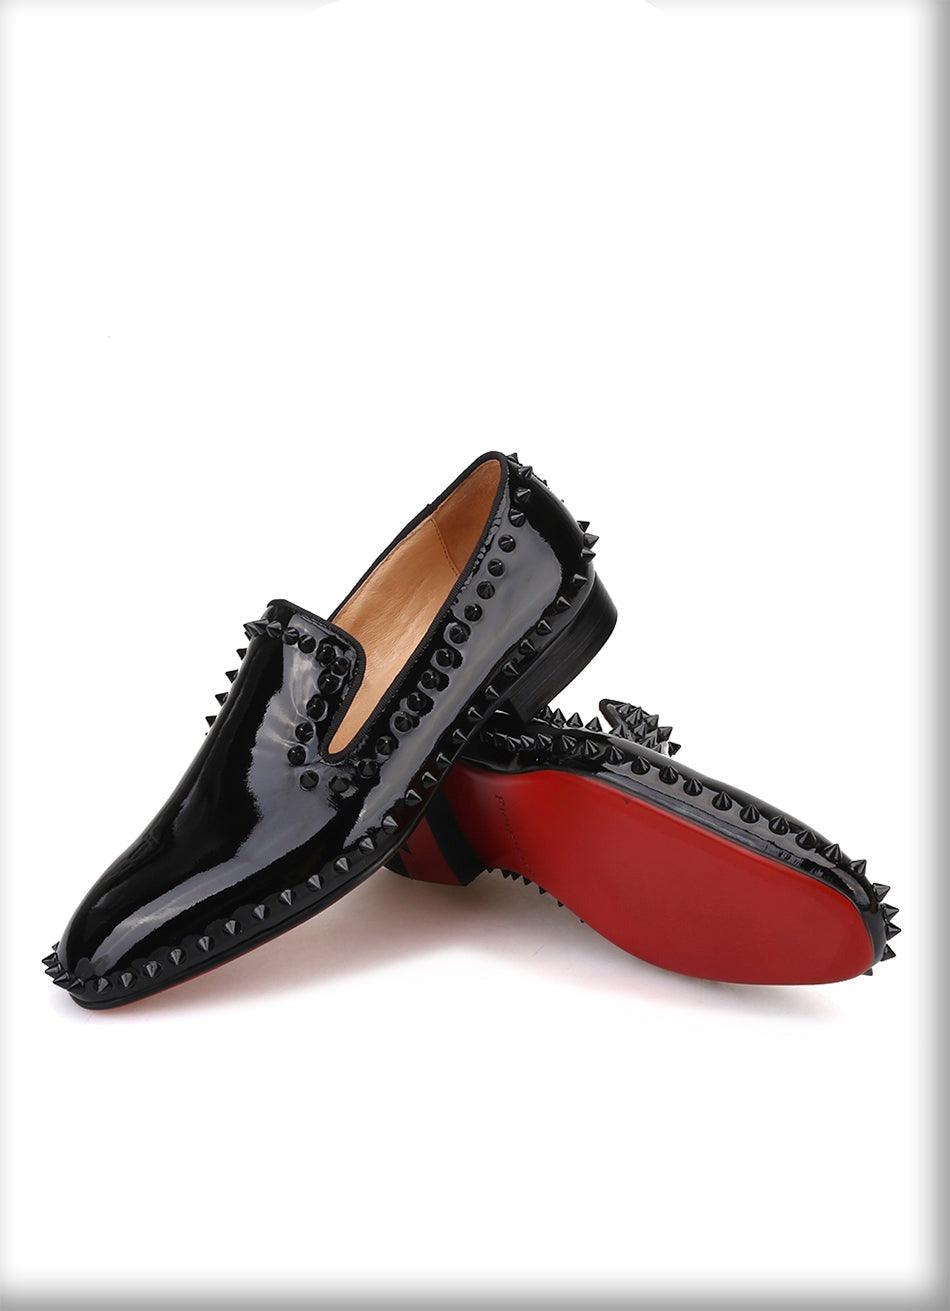 Black Patent Leather Spiked Men Loafers - Men Shoes - Loafer Shoes - Guocali